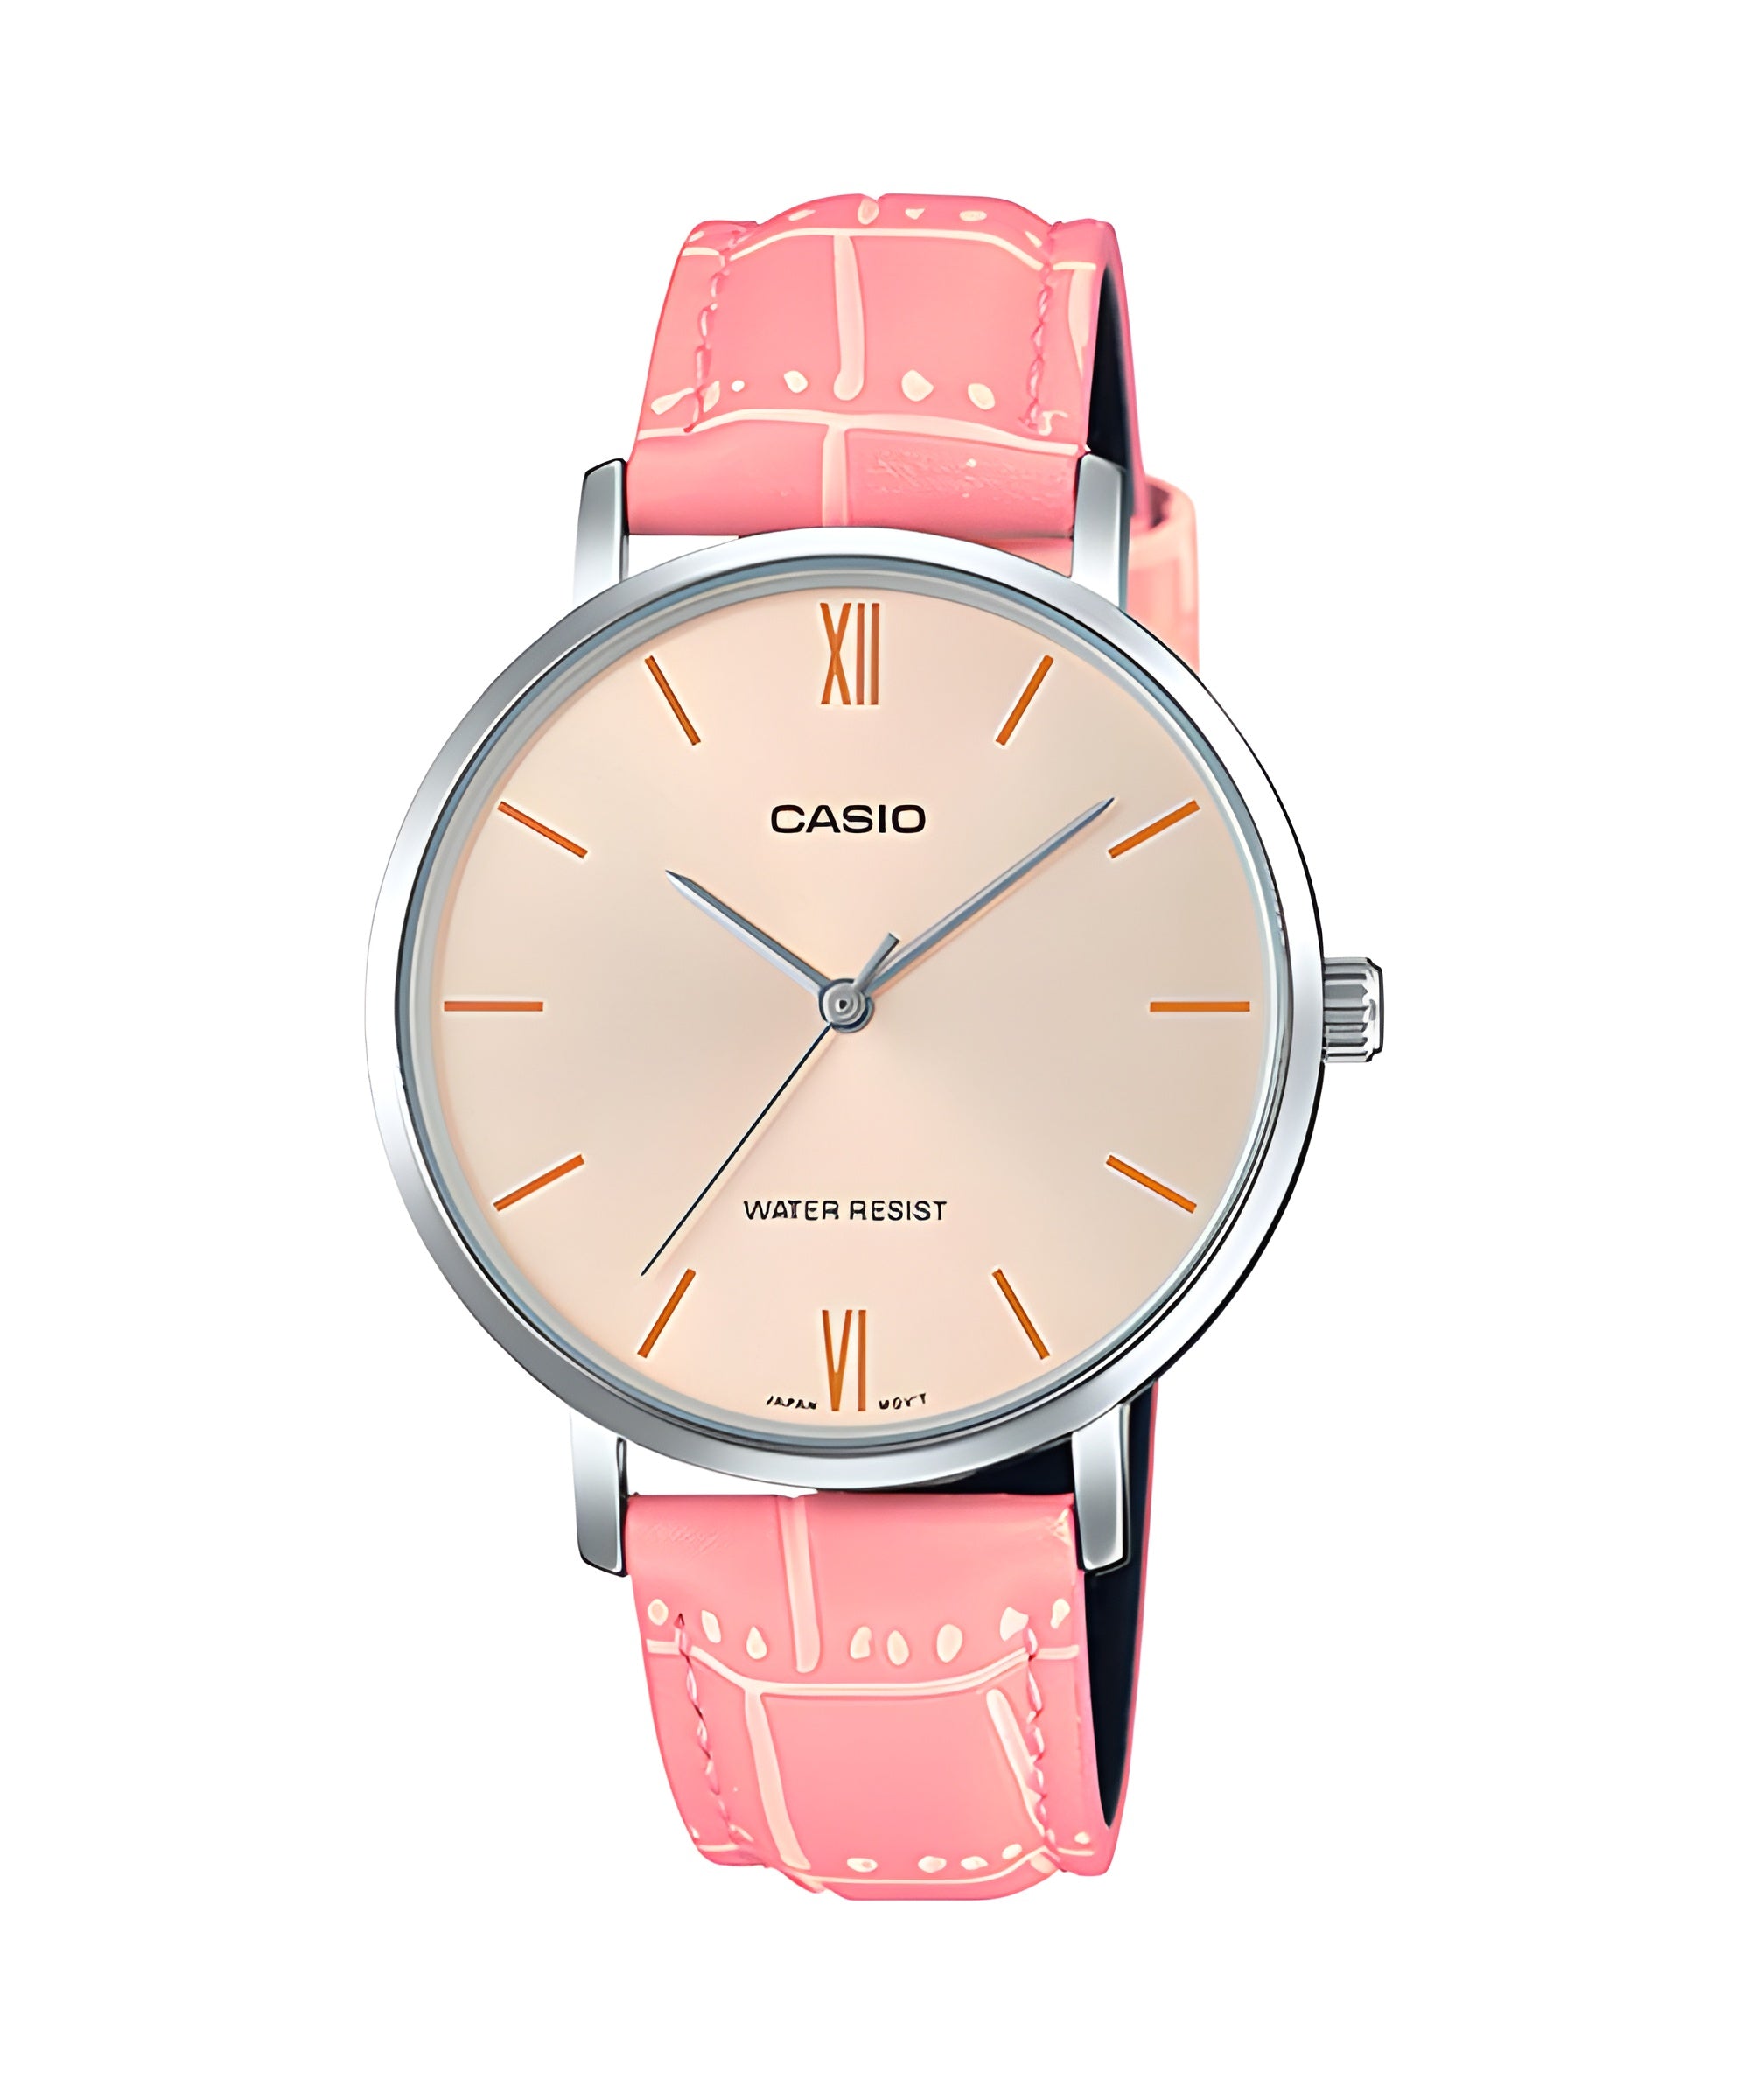 Casio Women's Analog Watch LTP-VT01L-4BUDF | Leather Band | Water-Resistant | Quartz Movement | Classic Style | Fashionable | Durable | Affordable | Halabh.com